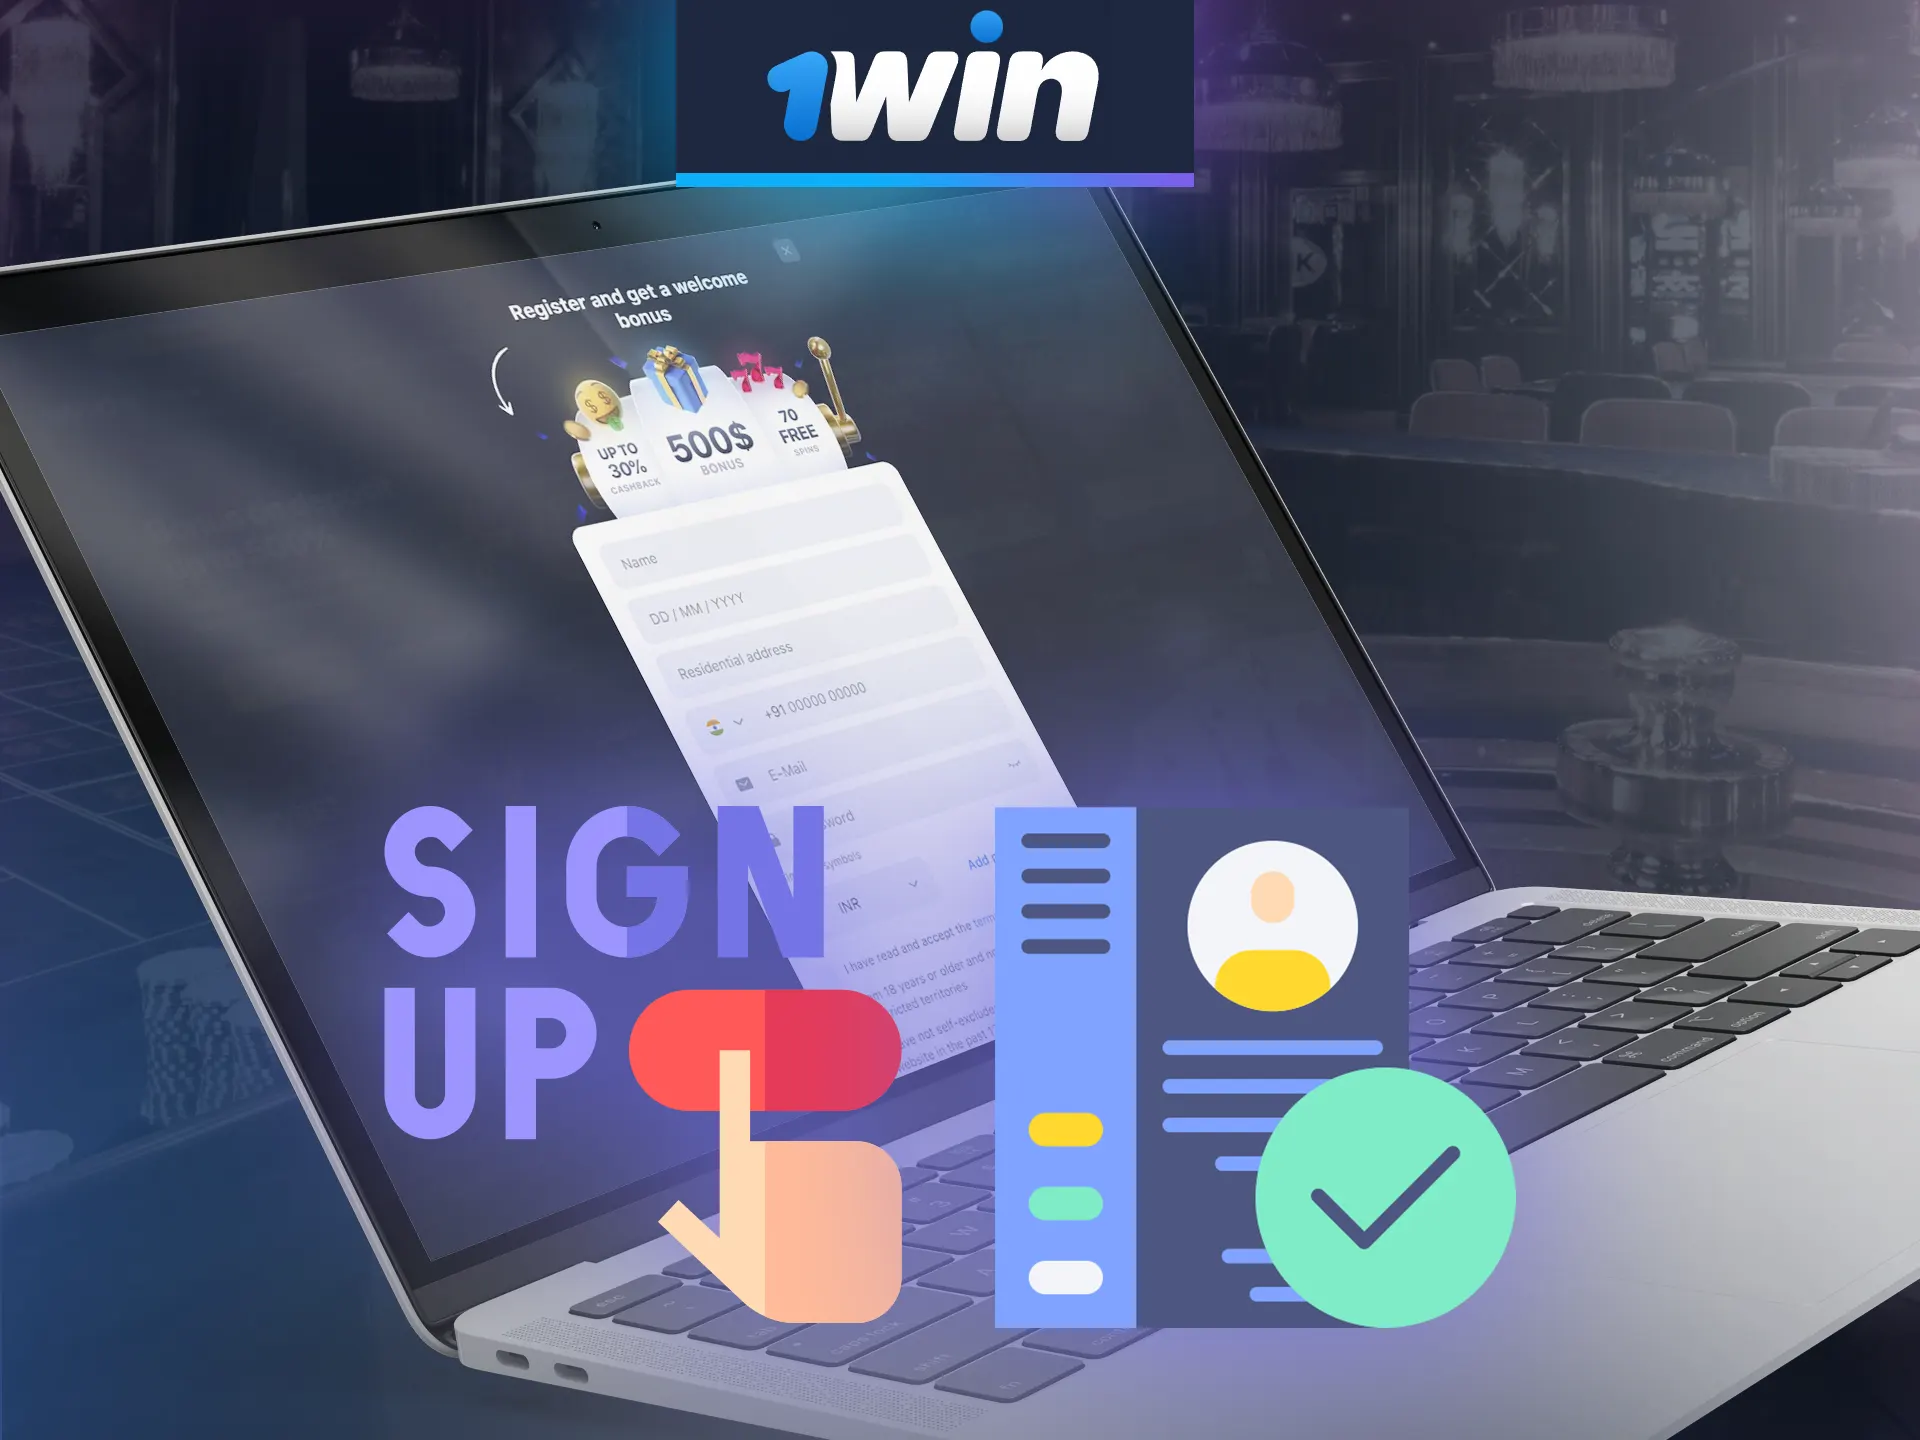 Register and verify on the 1win website.